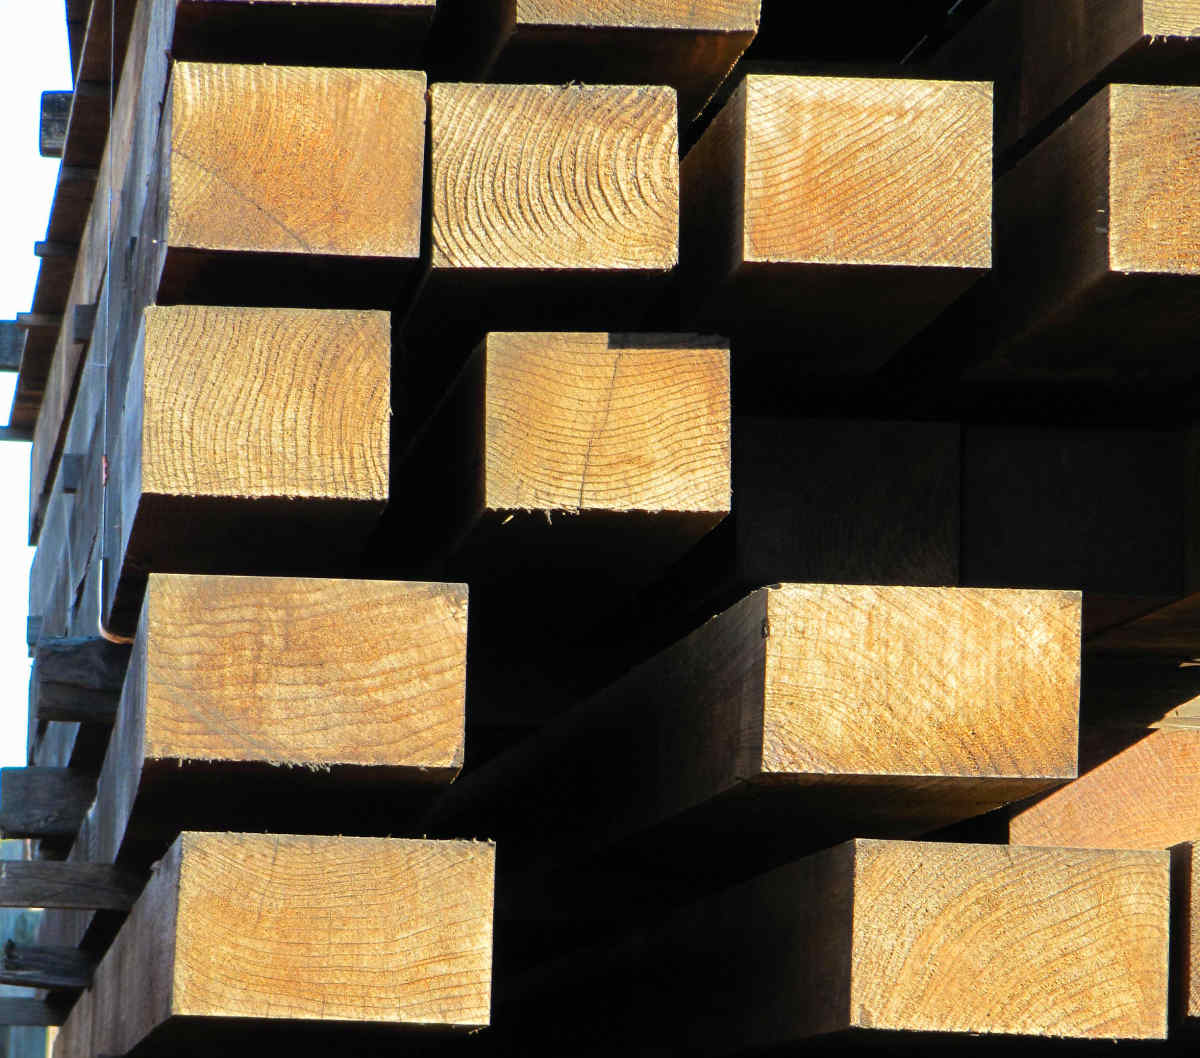 LARGE REDWOOD TIMBERS AIR DRYING FOR YEARS AT MILL